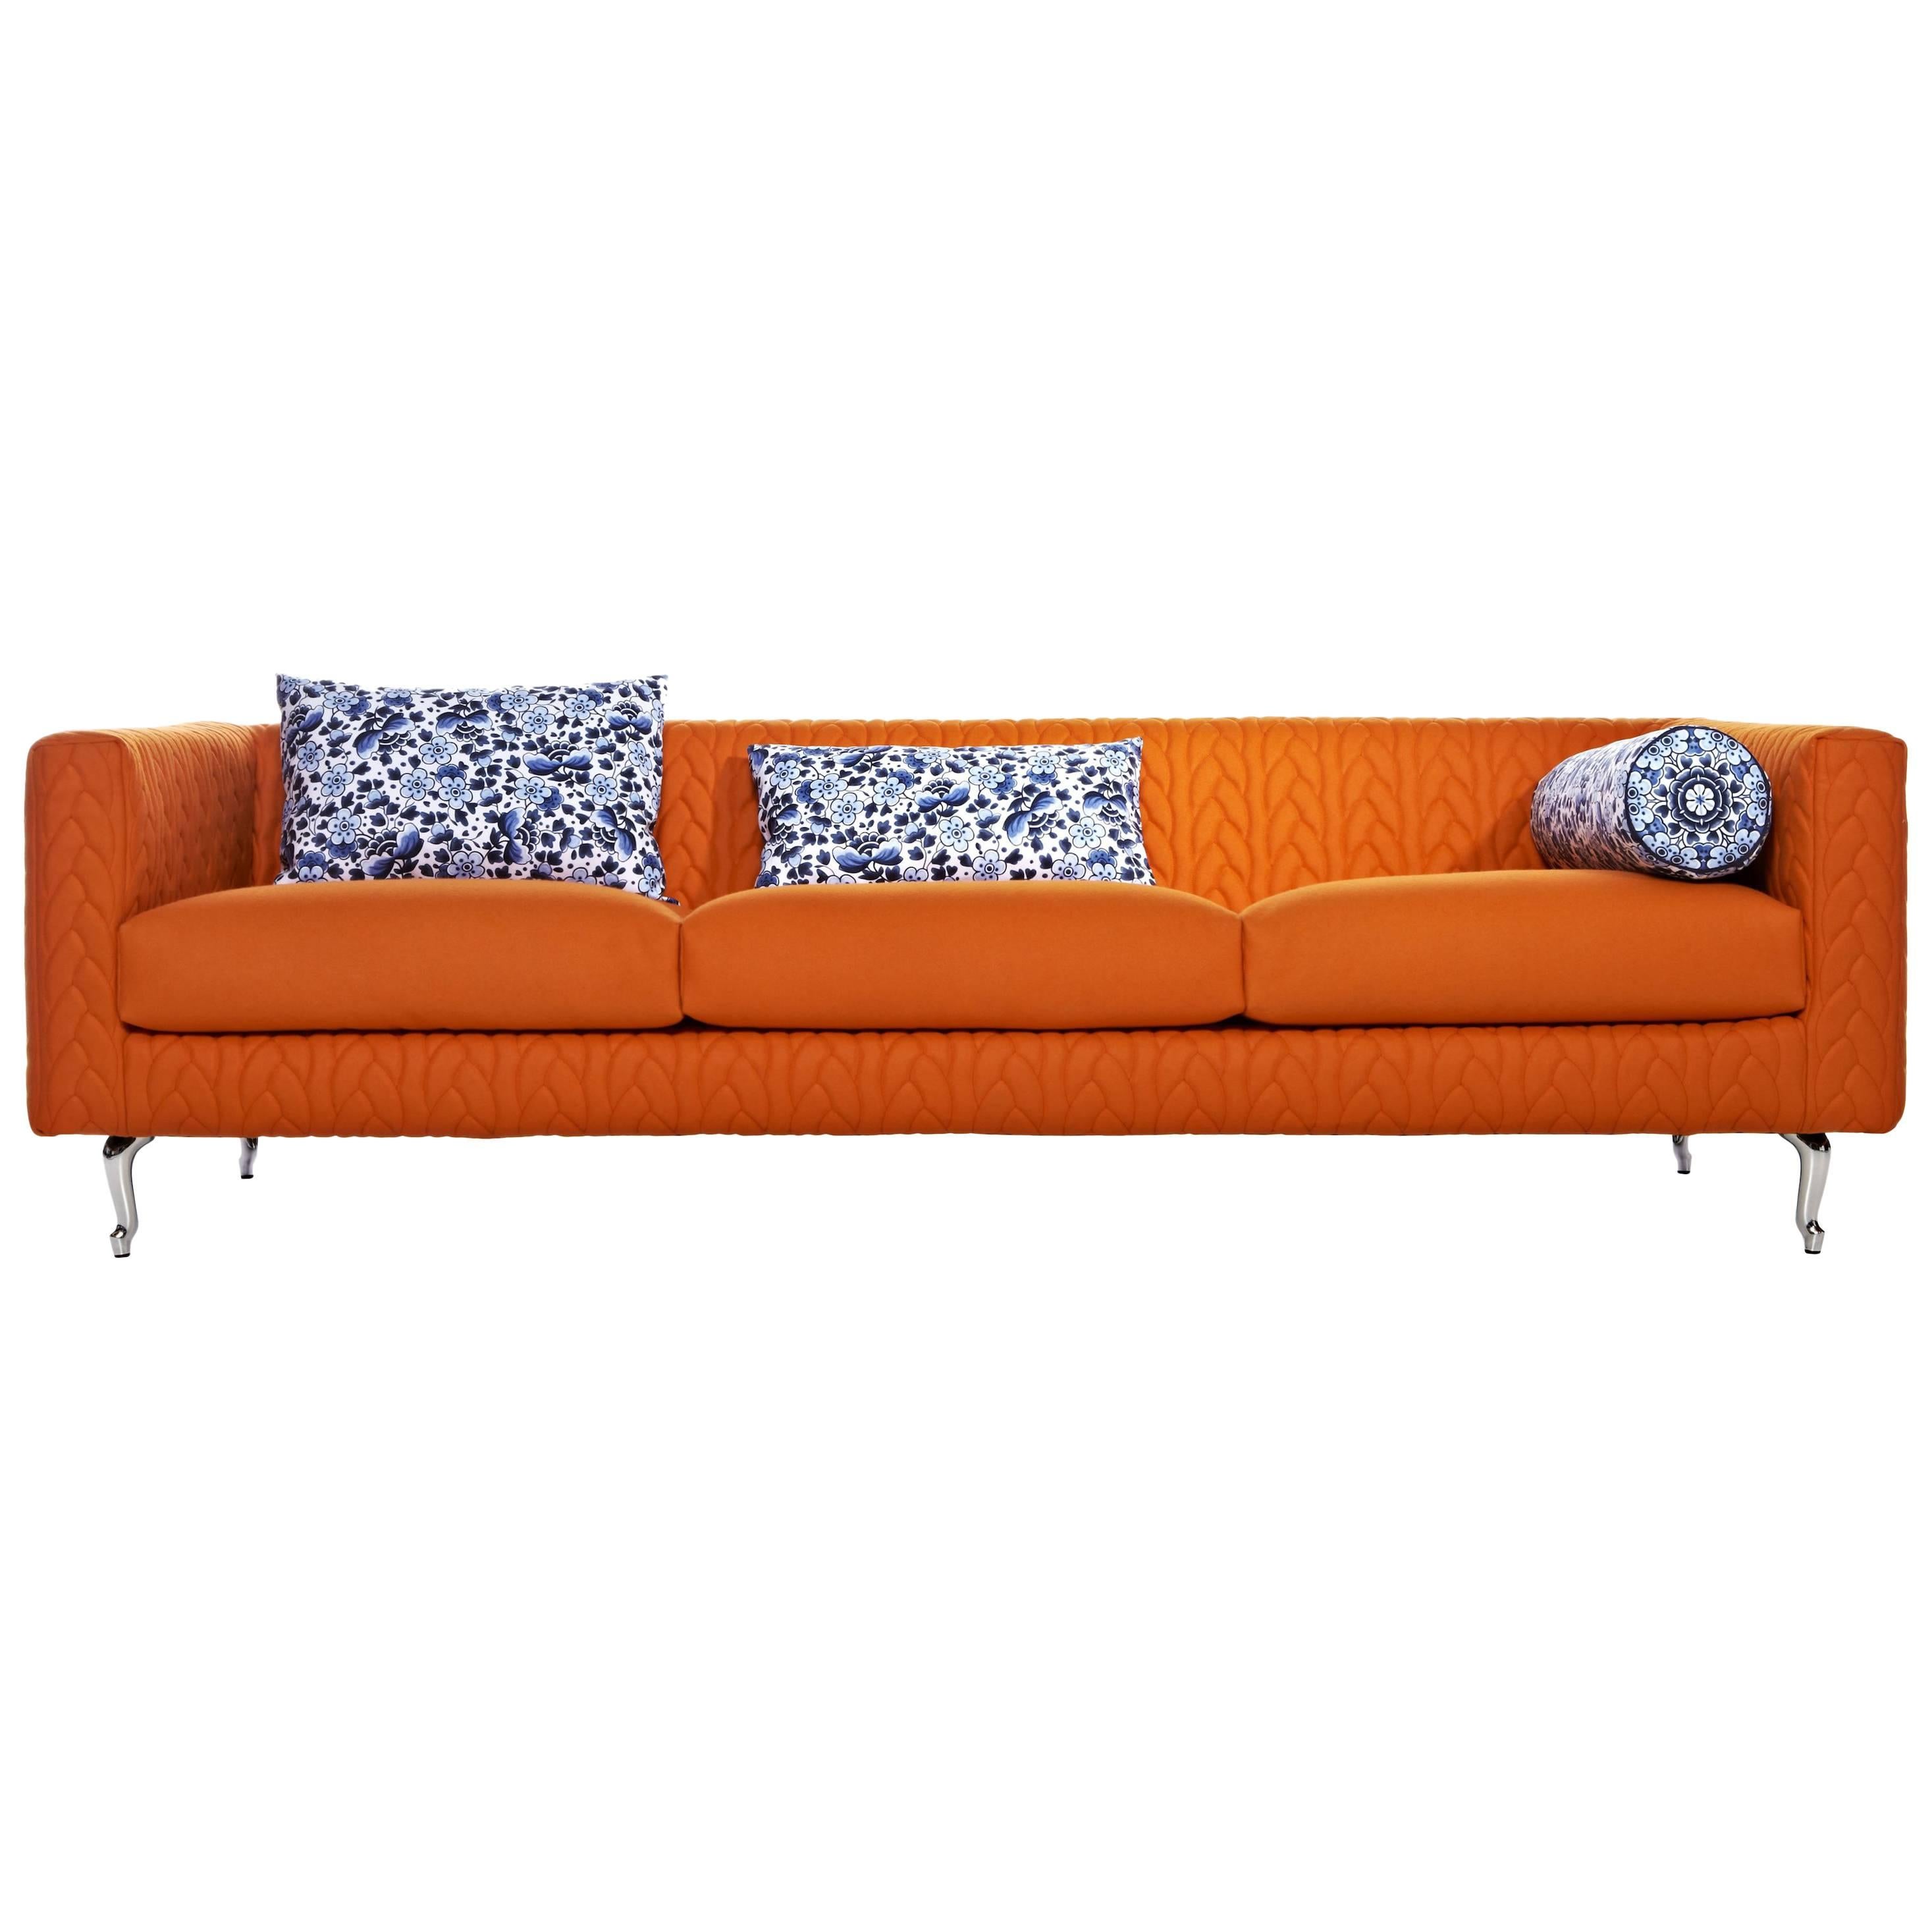 Moooi Boutique Delft Blue Jumper Triple Seater Sofa by Marcel Wanders For Sale